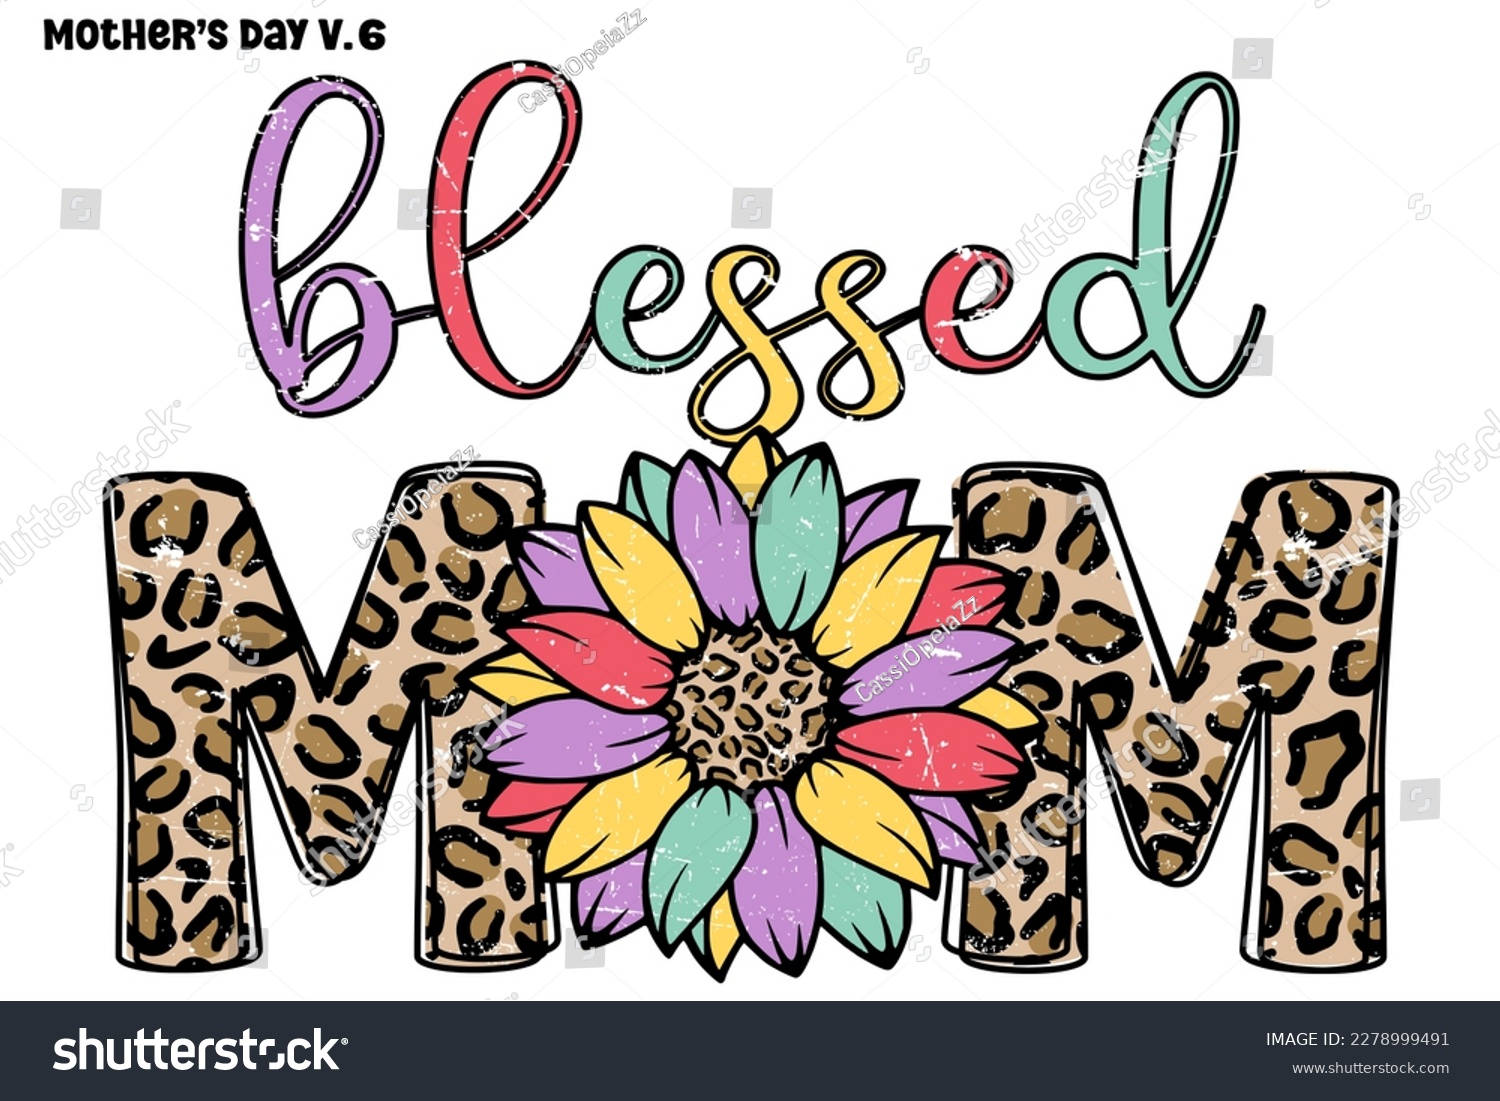 SVG of Blessed Mom , Blessed Mom Mother's Day Leopard Texture colorful Retro groovy 80s 90s Style Design for T-Shirt , For SVG. Mother's Day V.6 svg